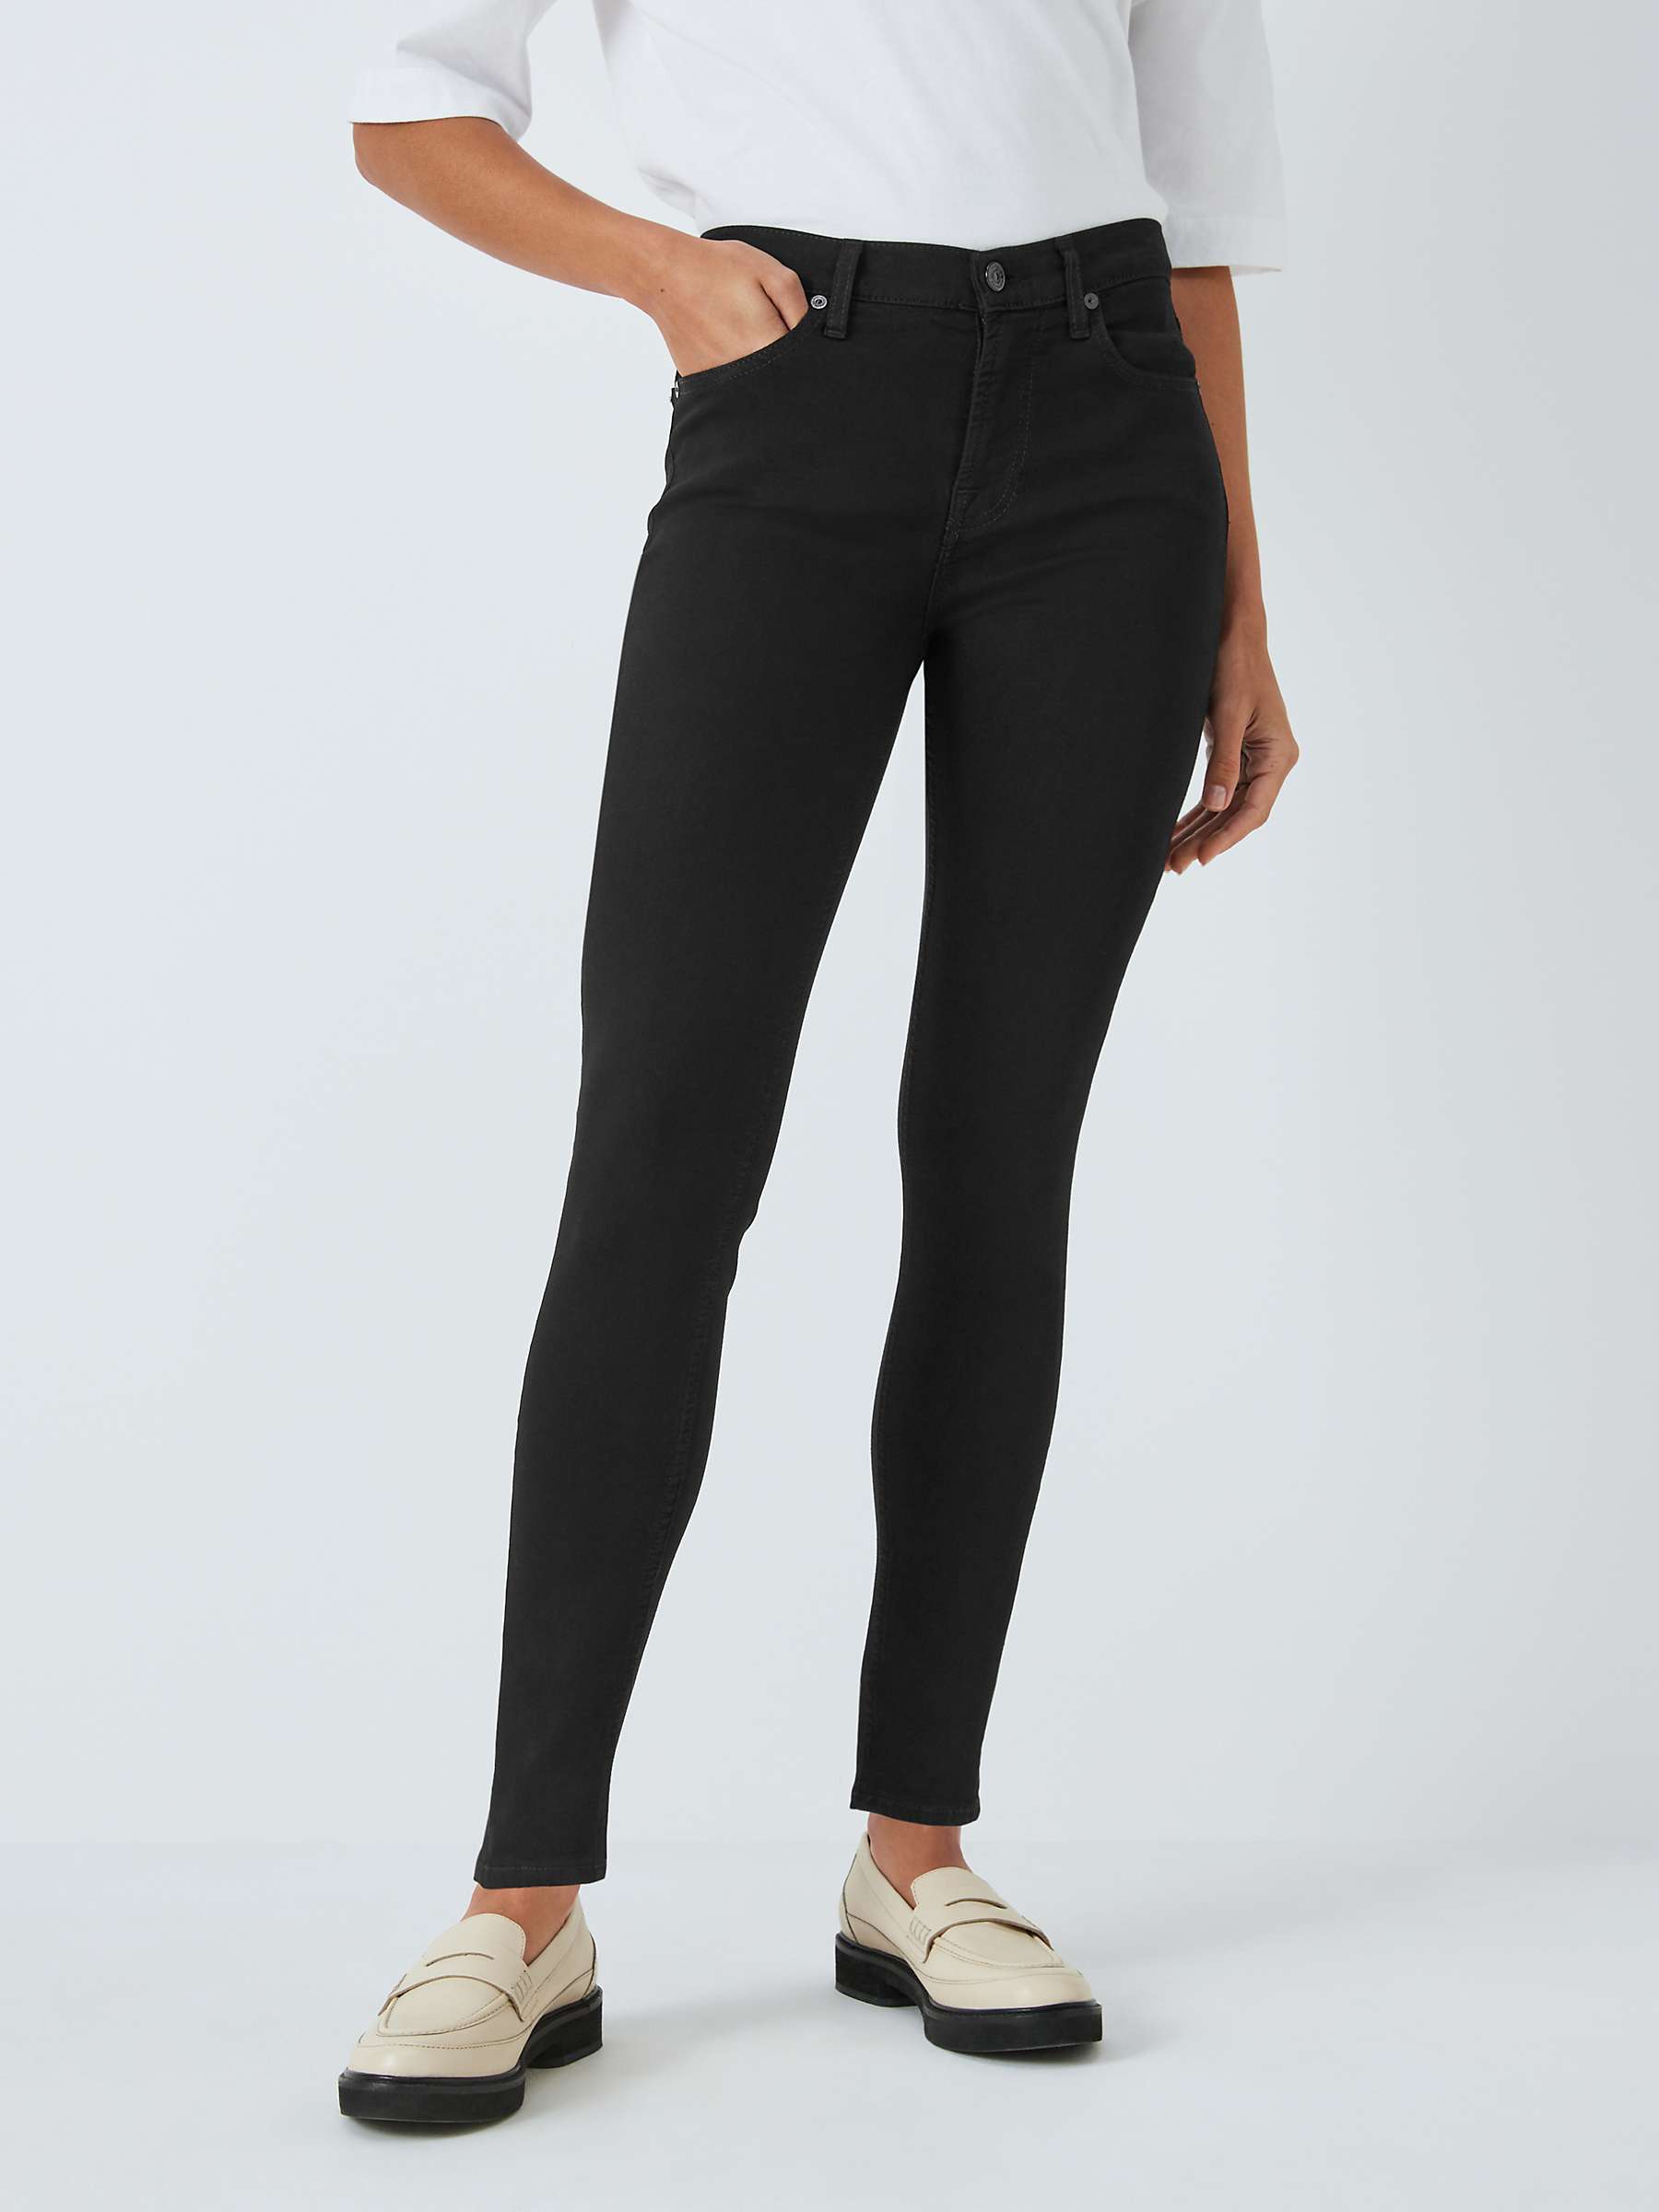 Buy 7 For All Mankind Skinny B(Air) Jeans, Rinsed Black Online at johnlewis.com